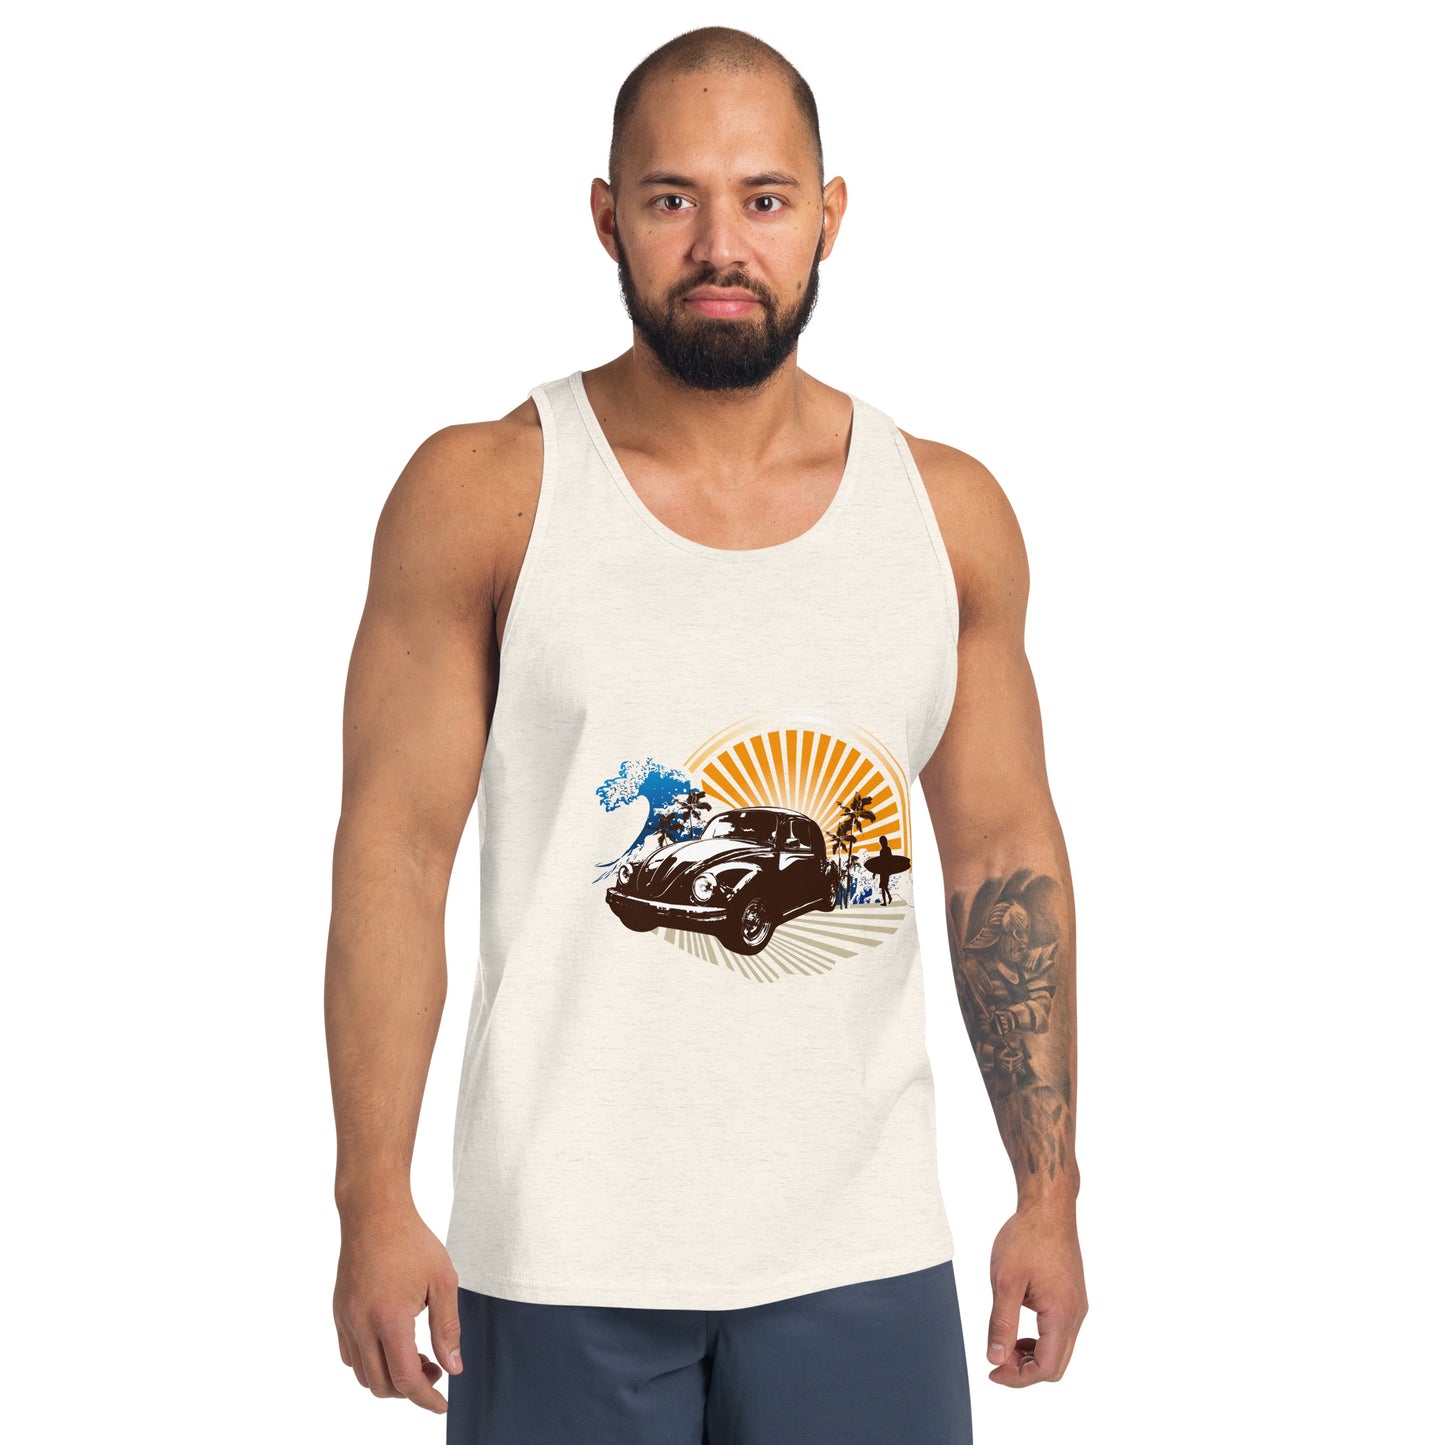 Men with oatmeal tank top with sunset and beetle car